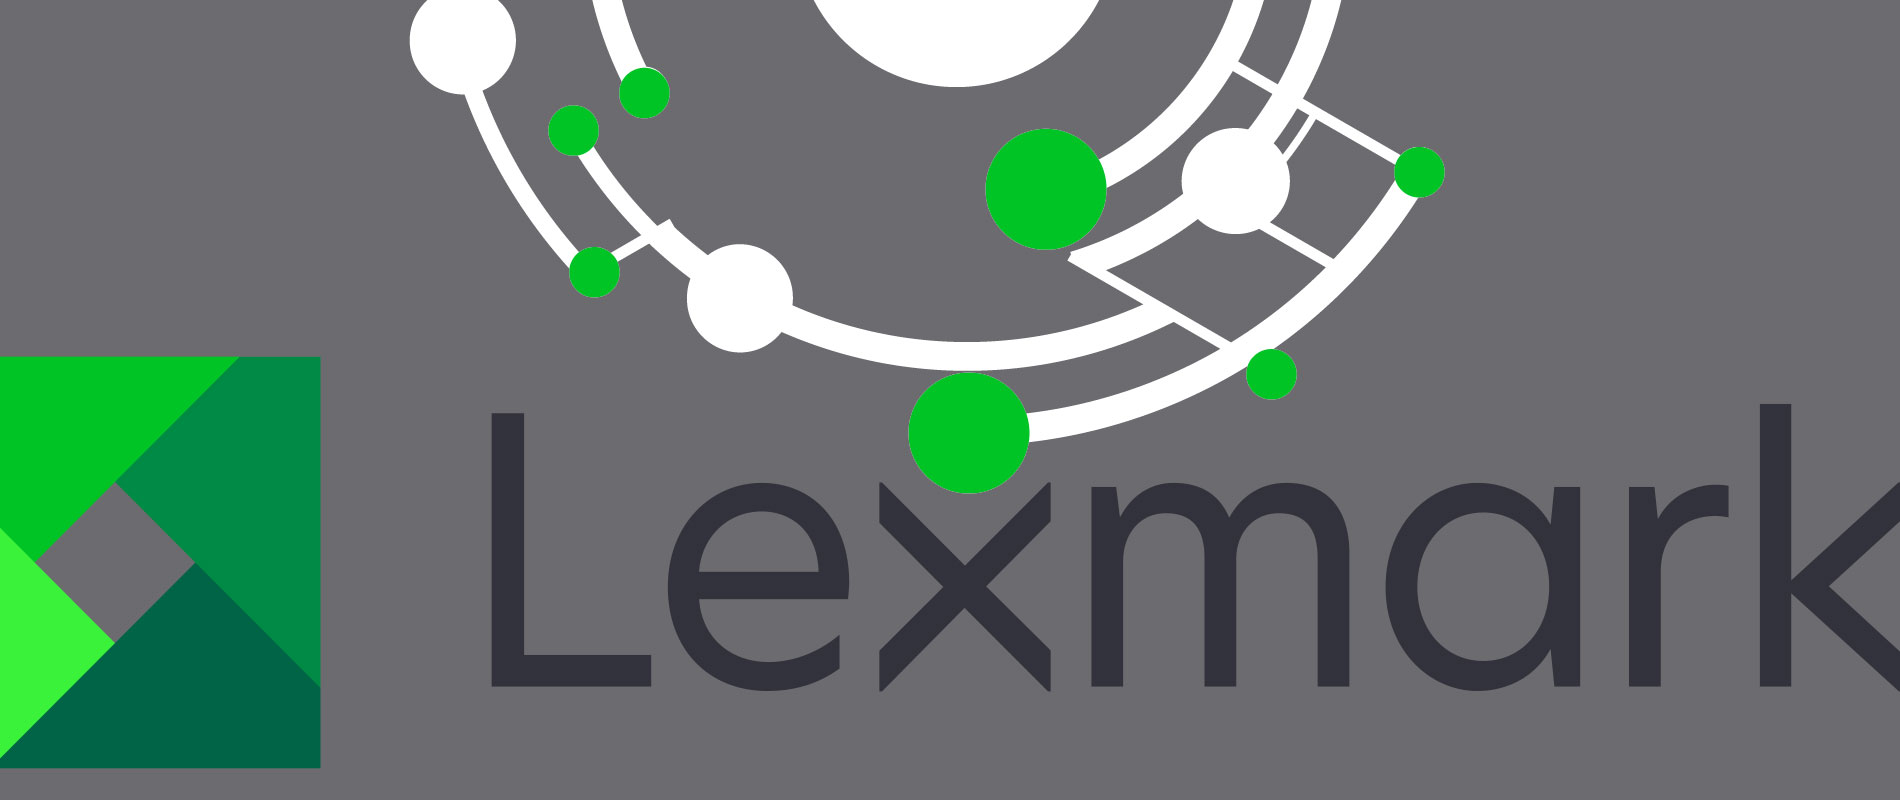 China-backed Lexmark Produces IoT Platform for Printing Services But Not For China - IoT Innovator